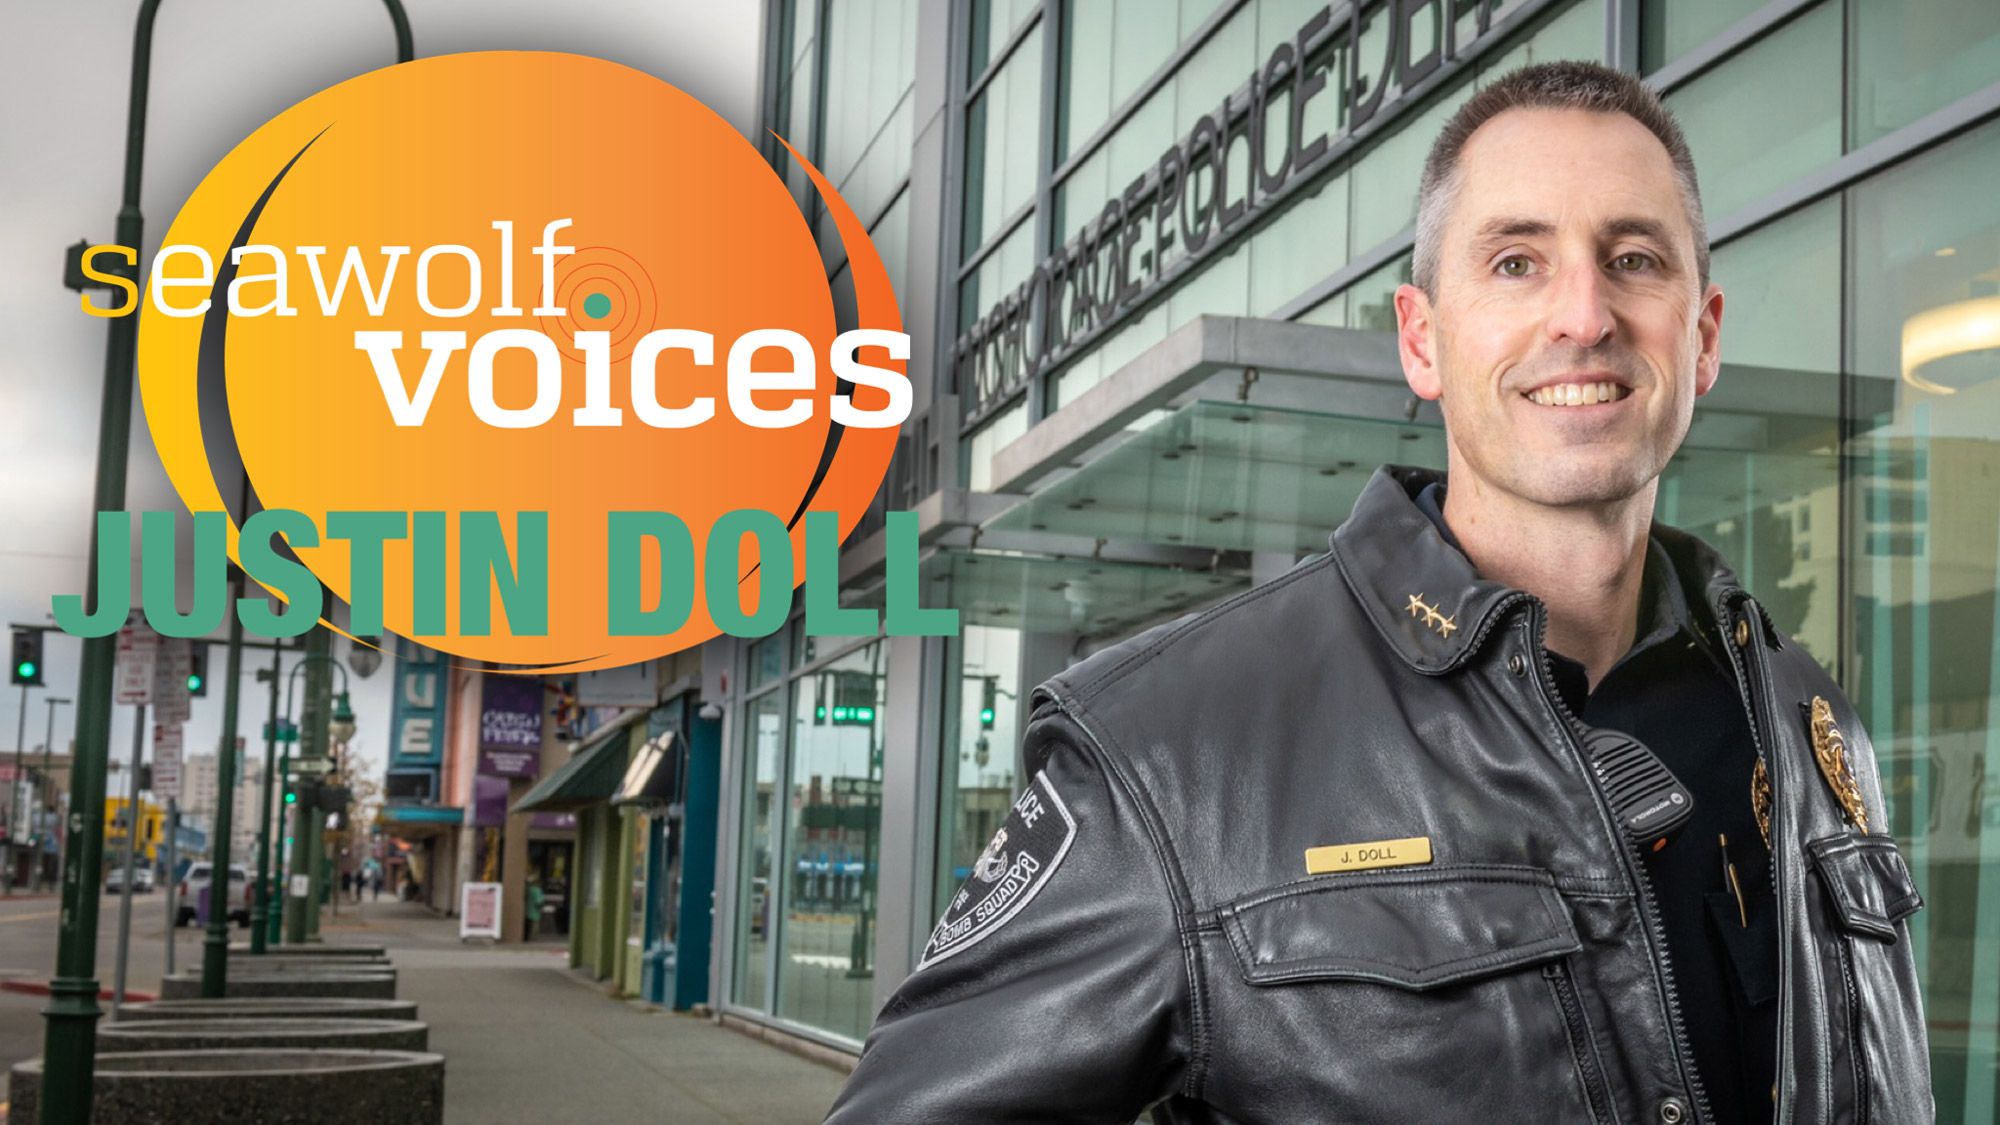 Economics alumnus and Anchorage Police Department Chief Justin Doll